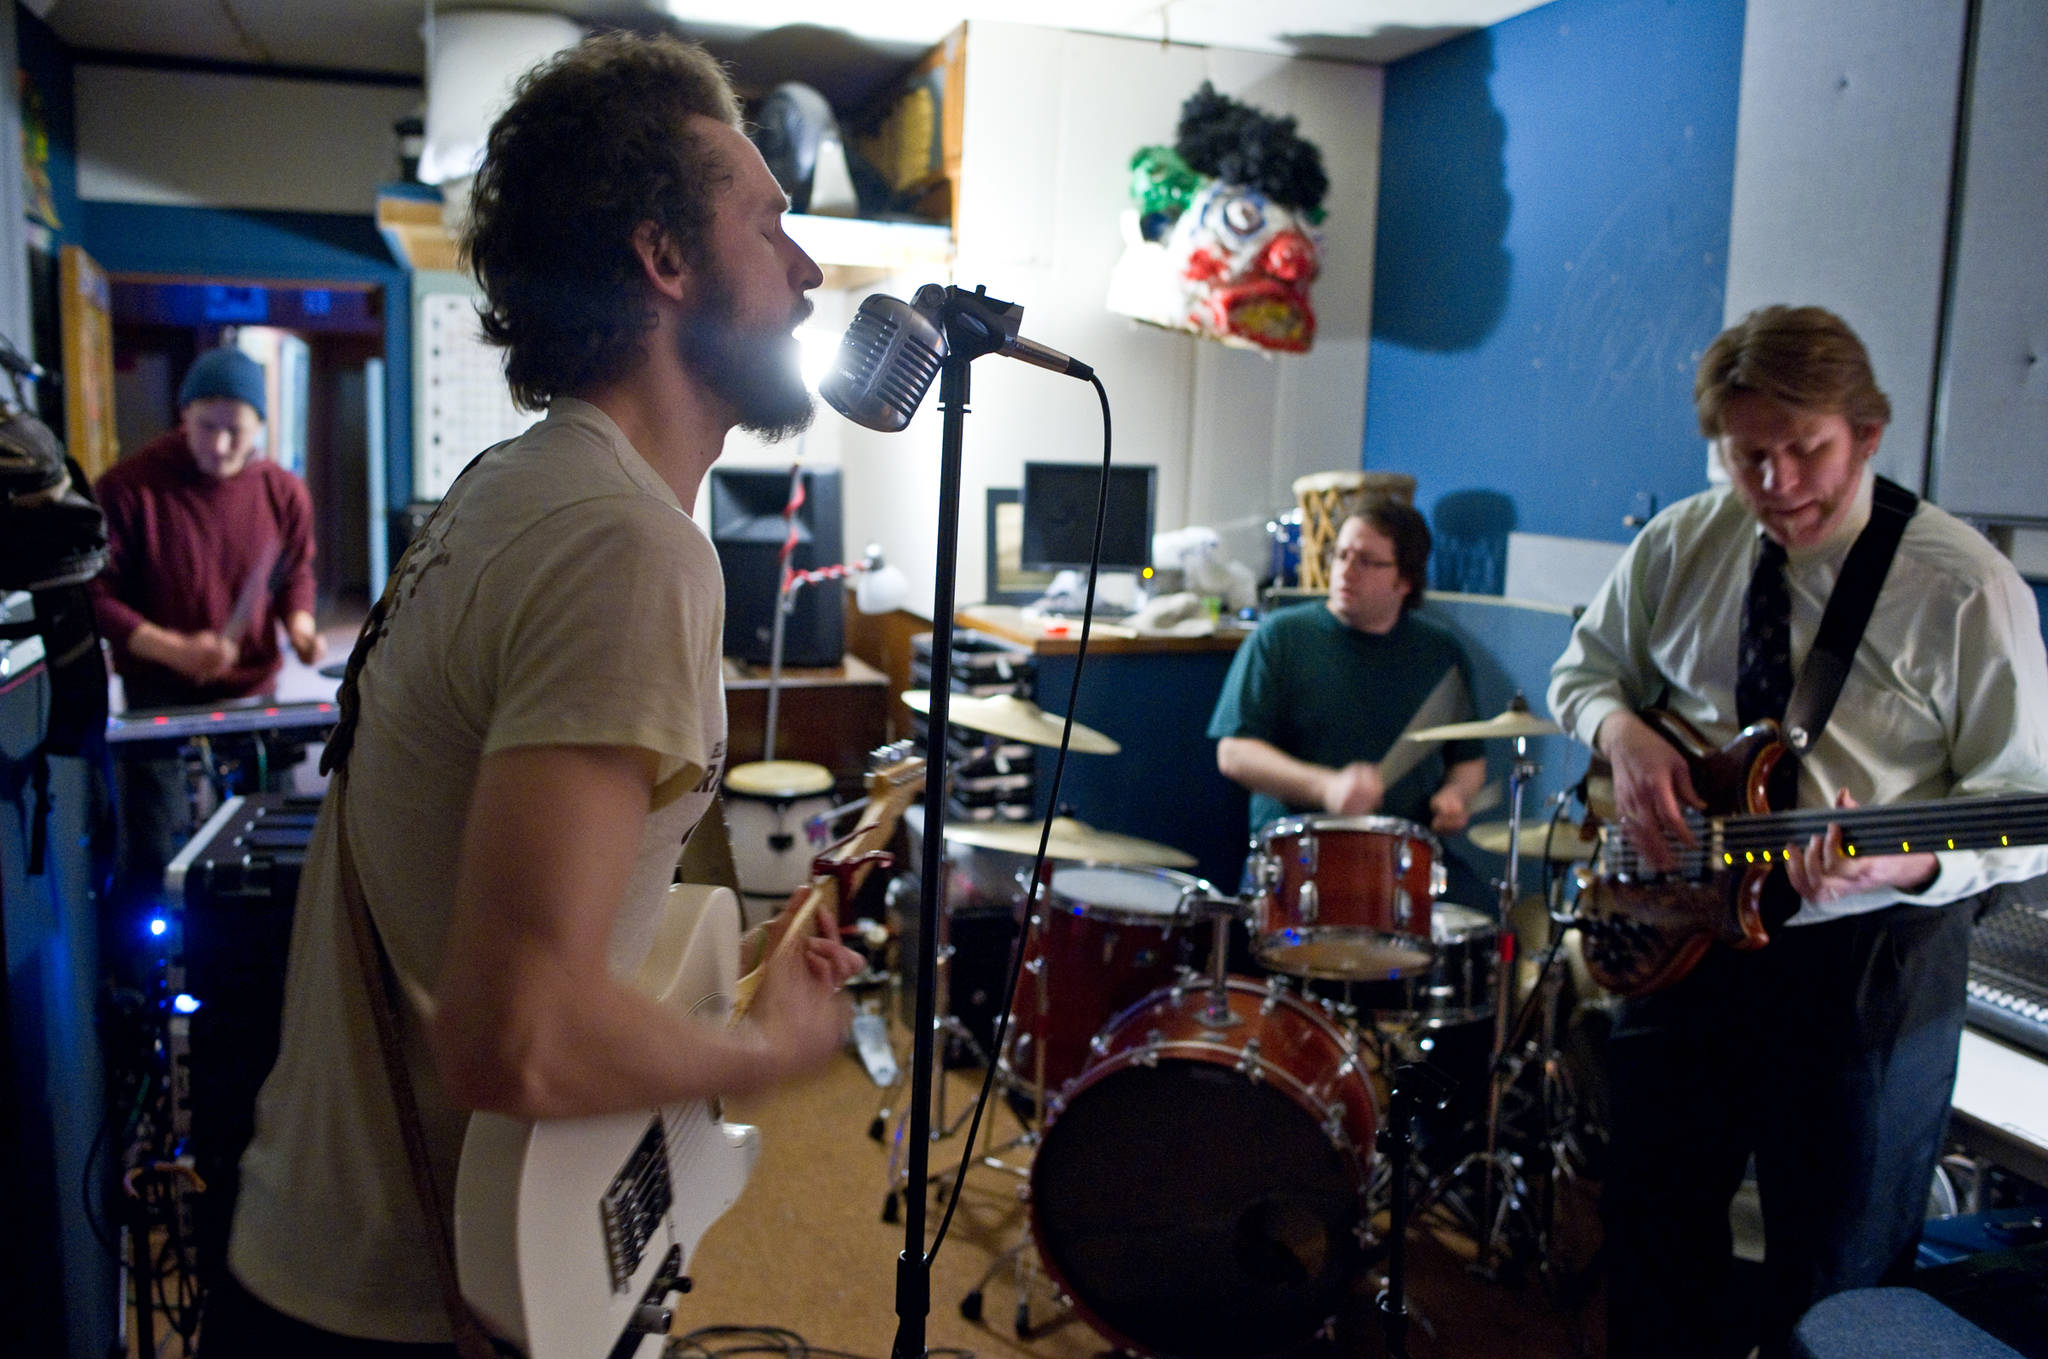 Nickolas Wagner, drums, left, George Kuhar, guitar and lead vocals, Jason Messing, drums and Simon Taylor, bass, right, of Playboy Spaceship rehearse Tuesday. Not shown is Bridget Cross Kuhar, keyboards. (Michael Penn | Juneau Empire File)